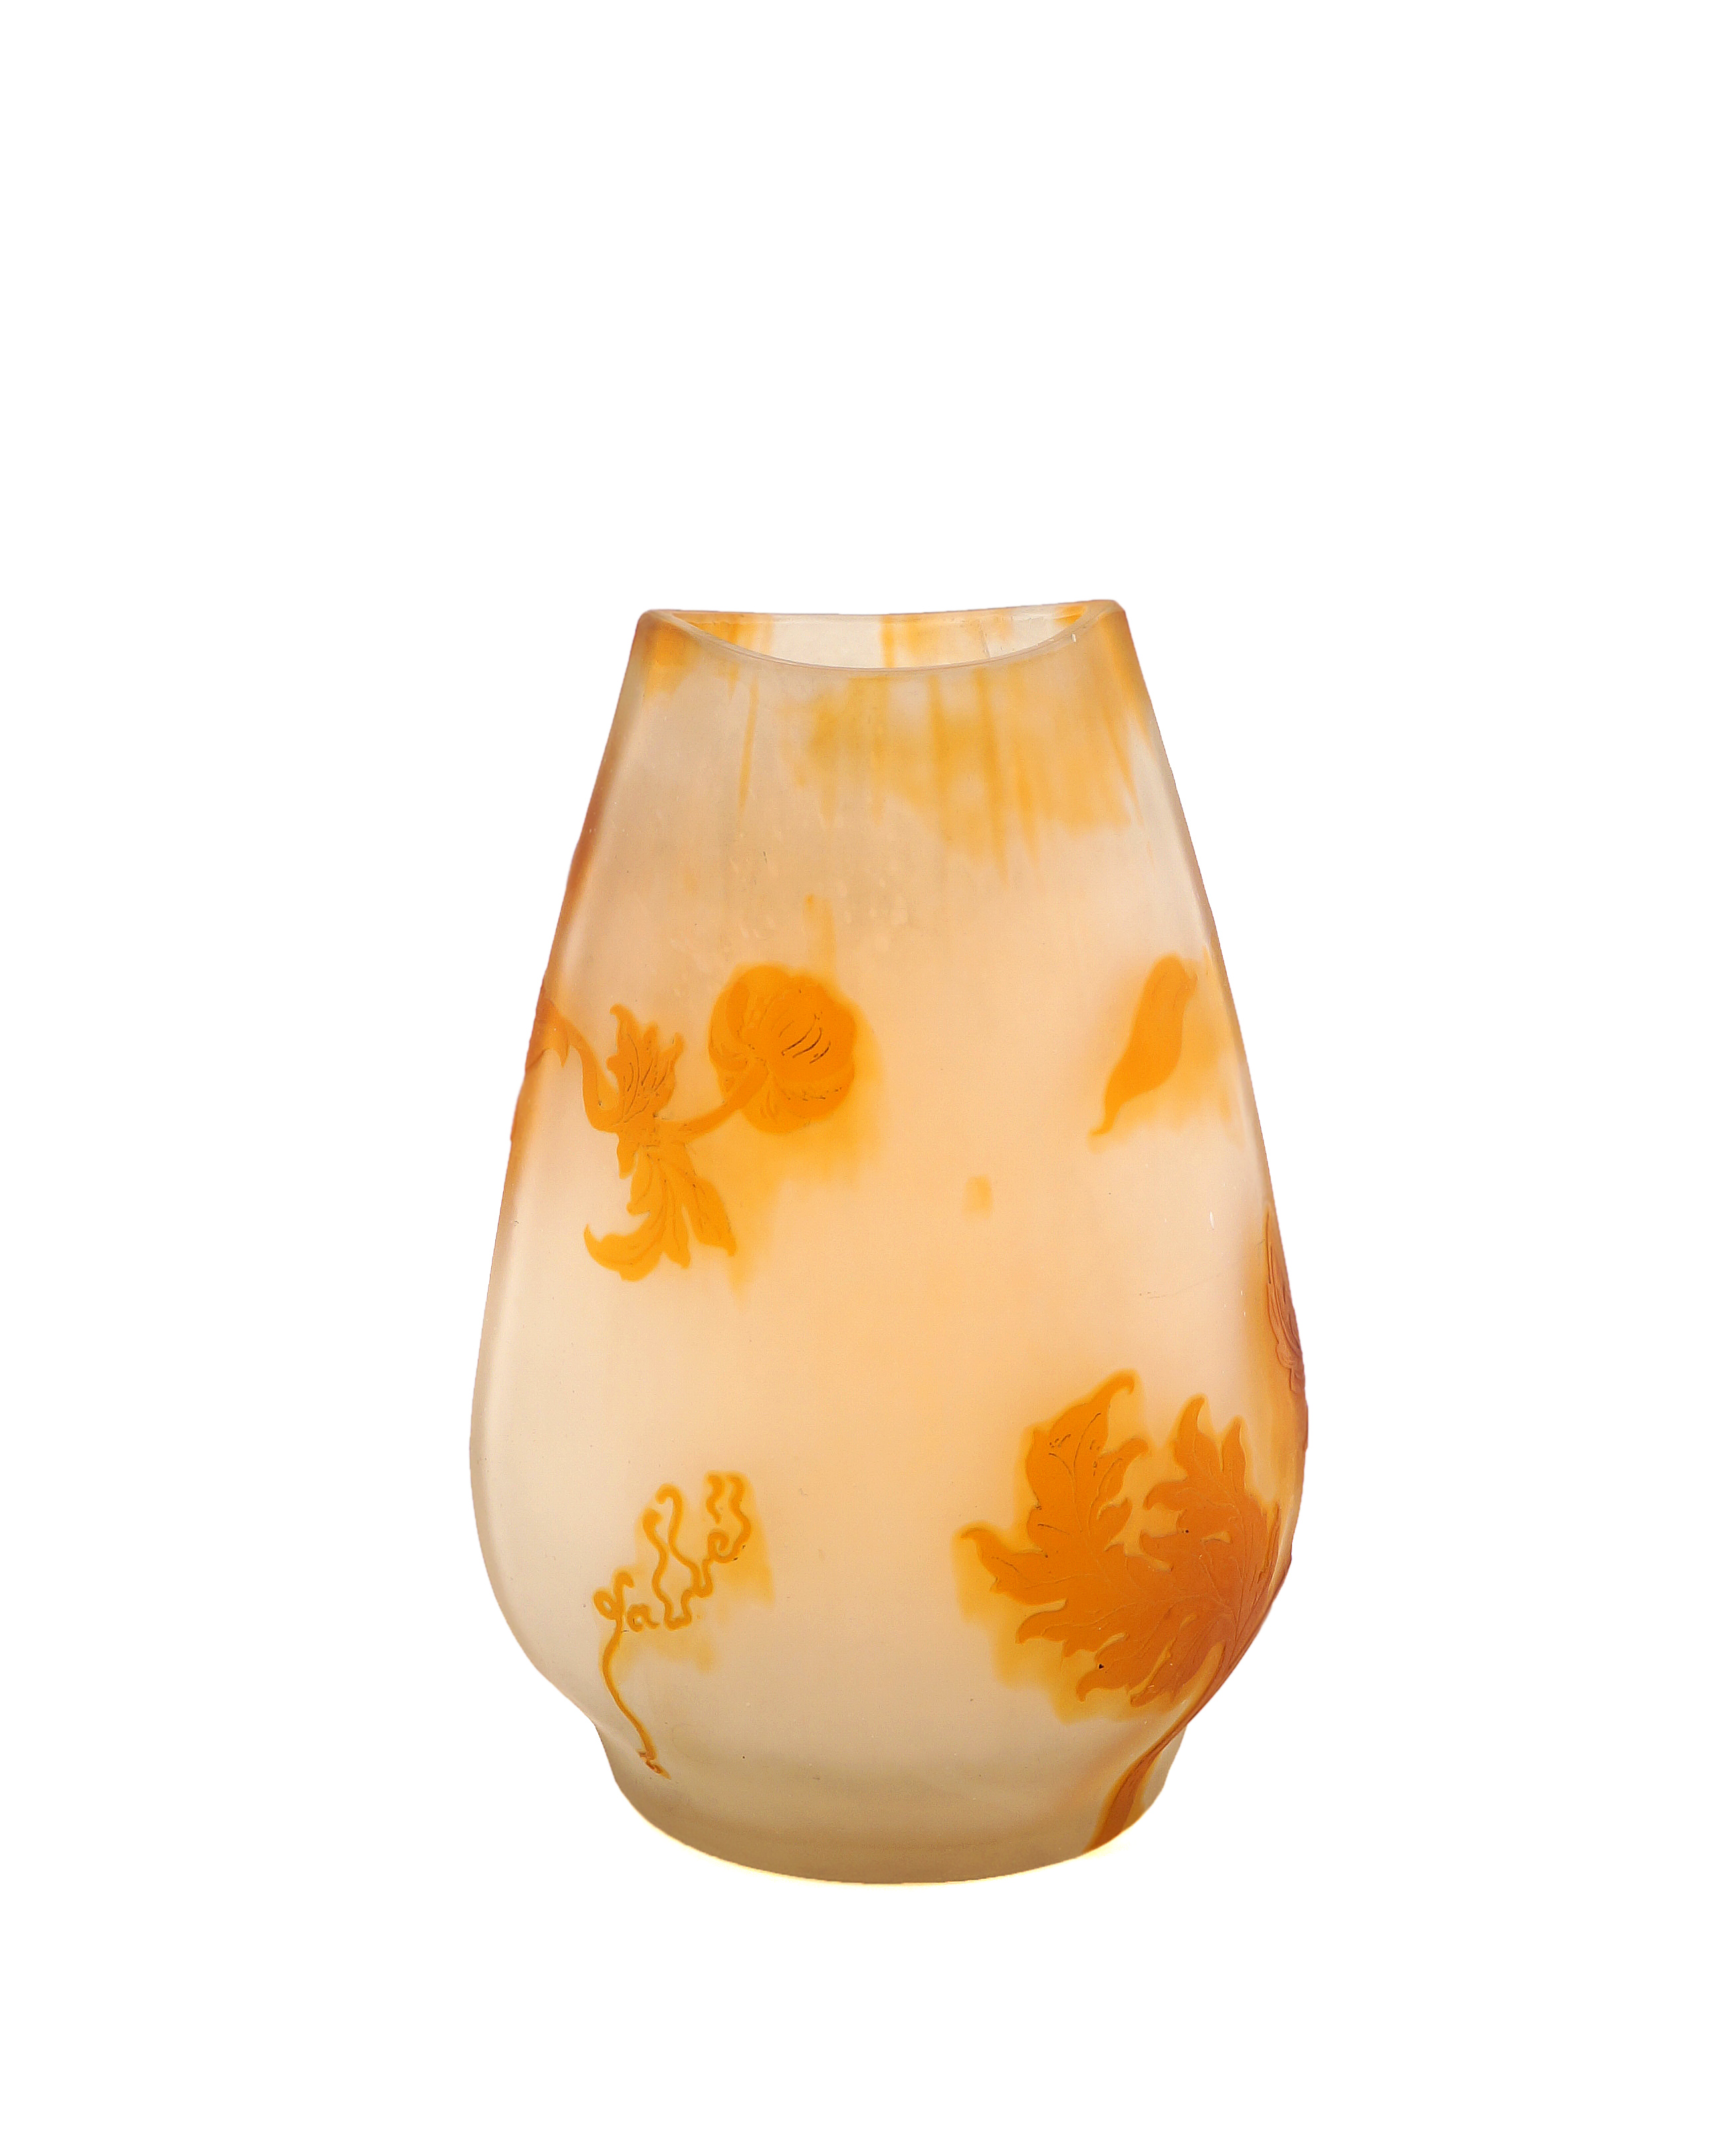 Emille Galle' A small cameo glass vase, signed nouveau style Nancy, 1846-1904 h. 16,5 cm. - Image 2 of 2